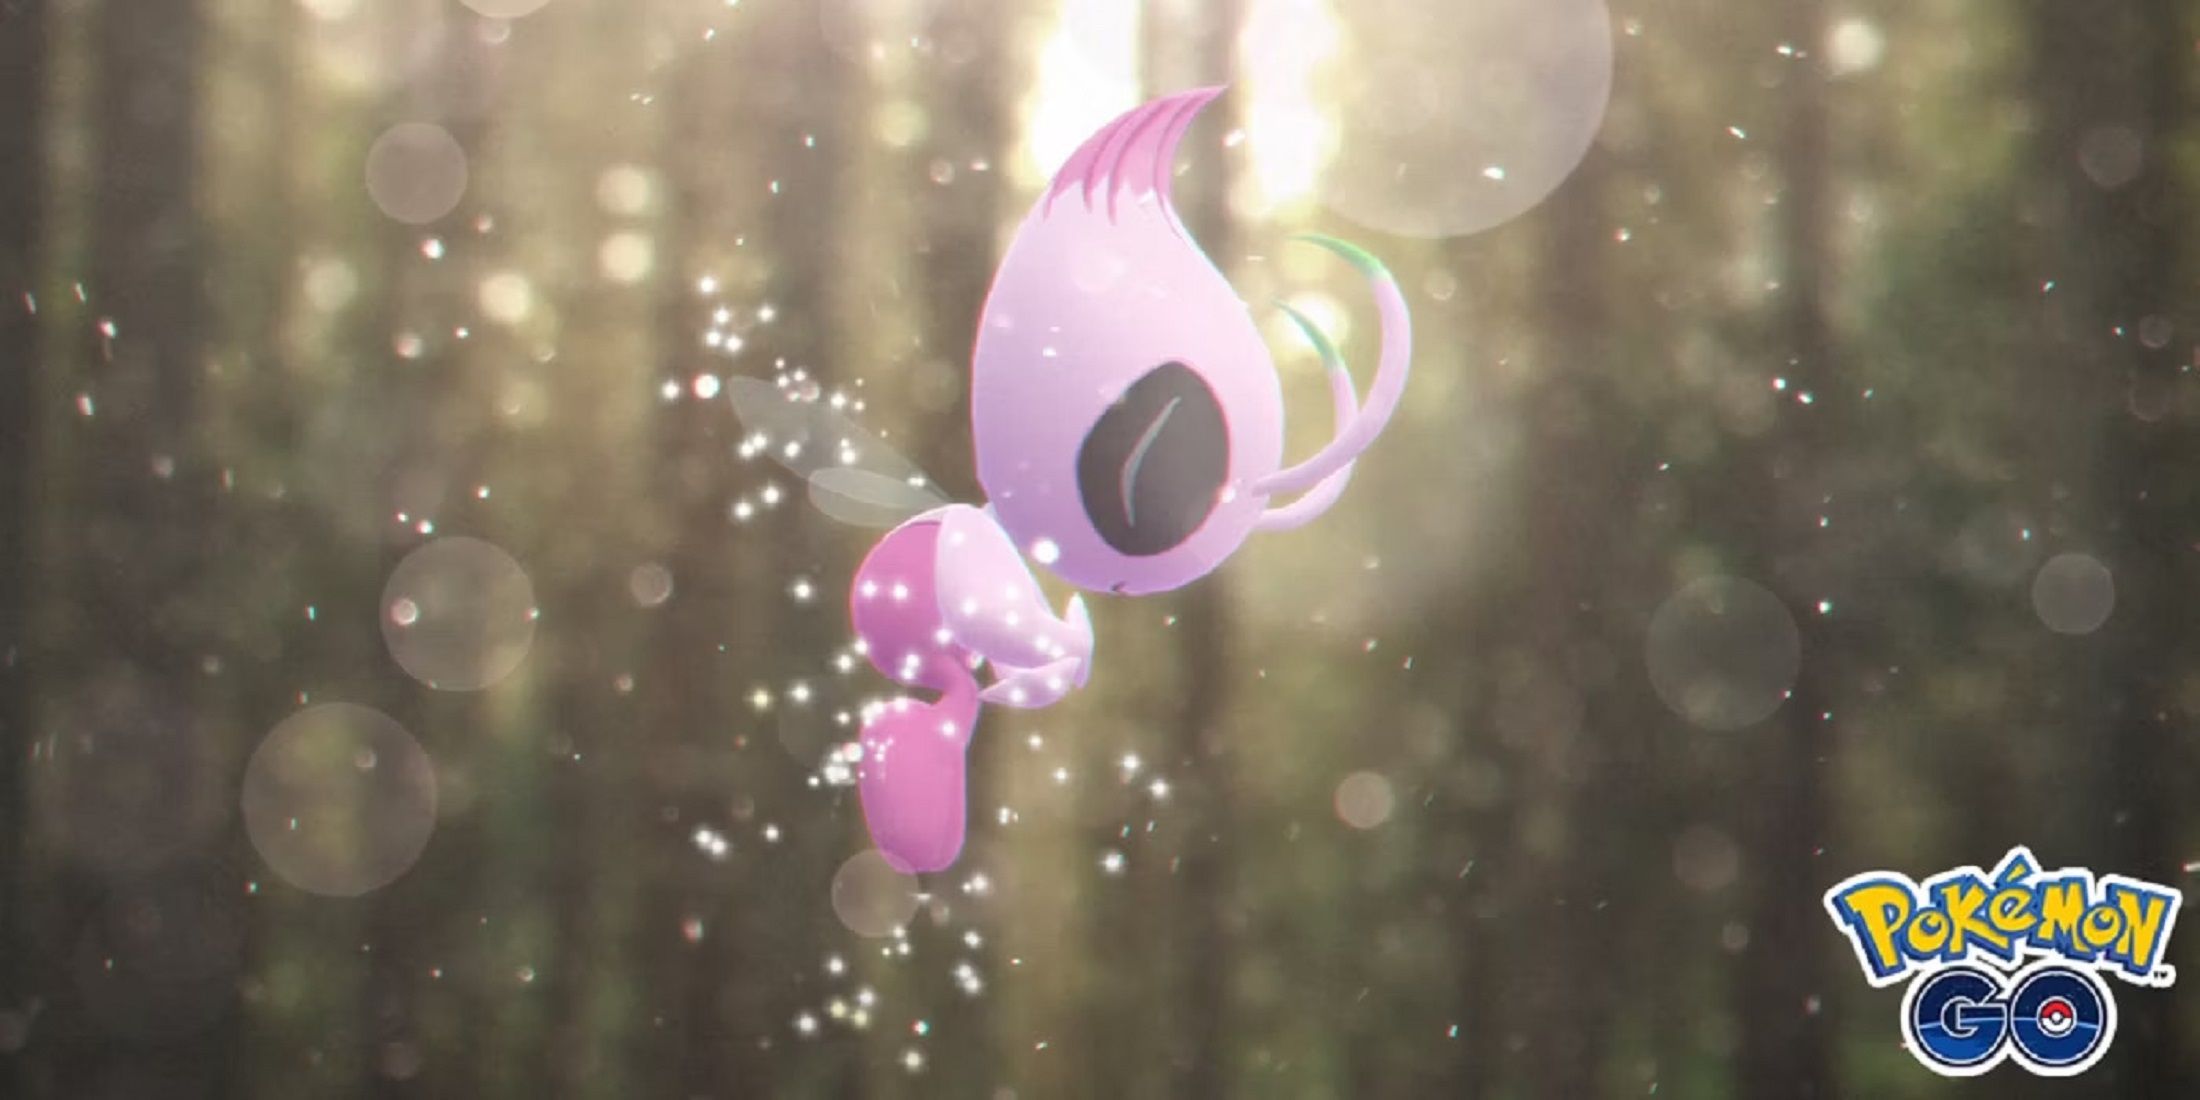 Pokemon GO stops certain longtime players from starting a limted-time Shiny Celebi quest.